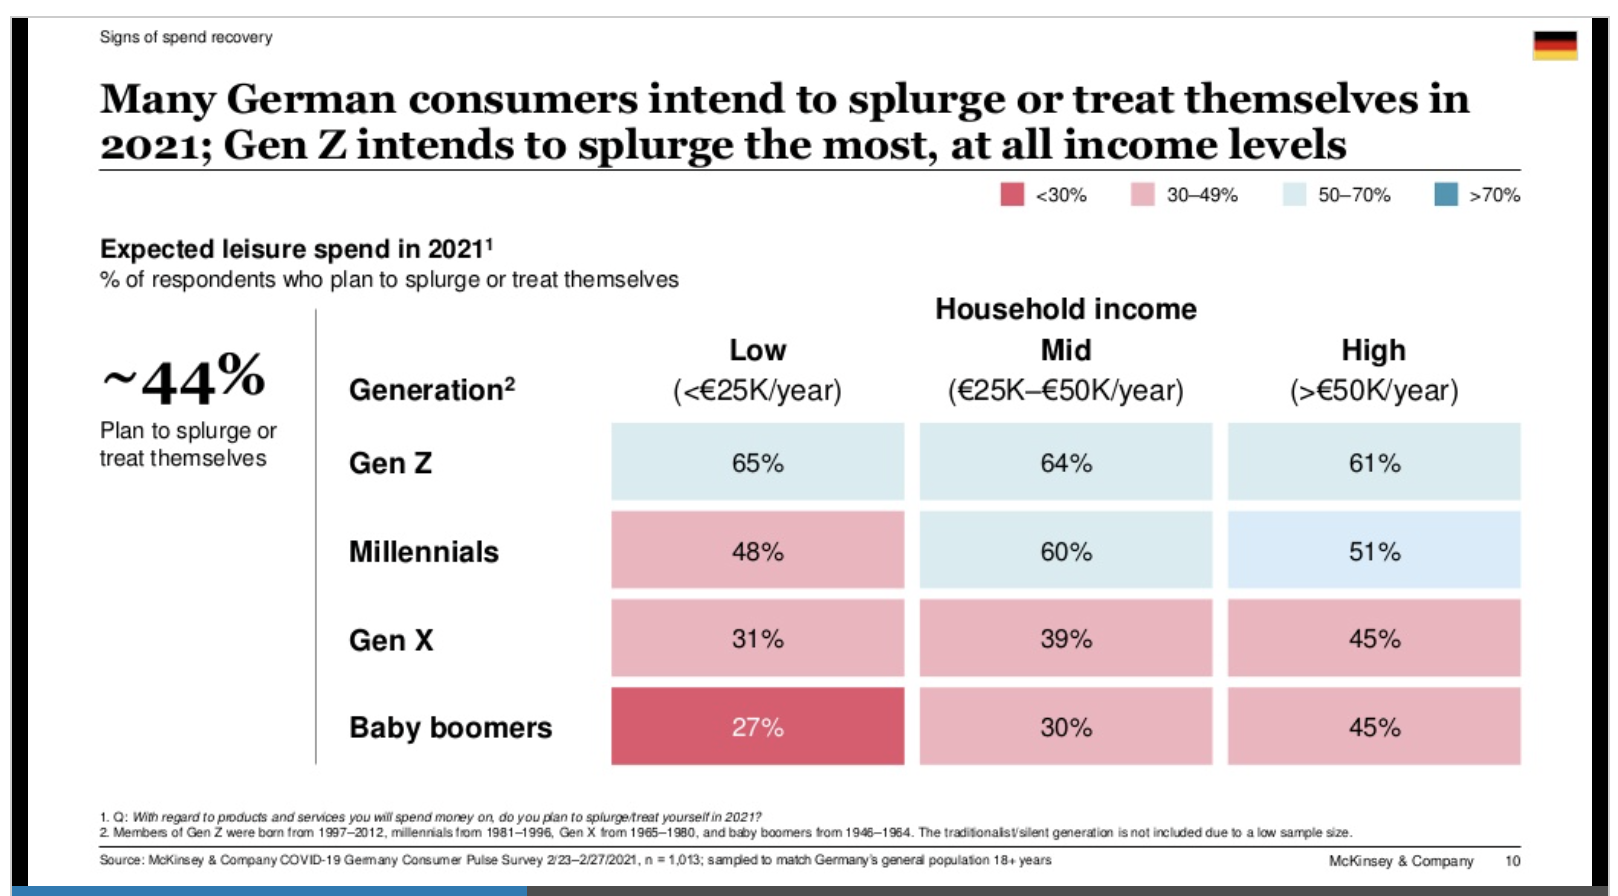 Many German consumers intend to splurge or treat themselves in 2021; Gen Z intends to splurge the most, at all income levels